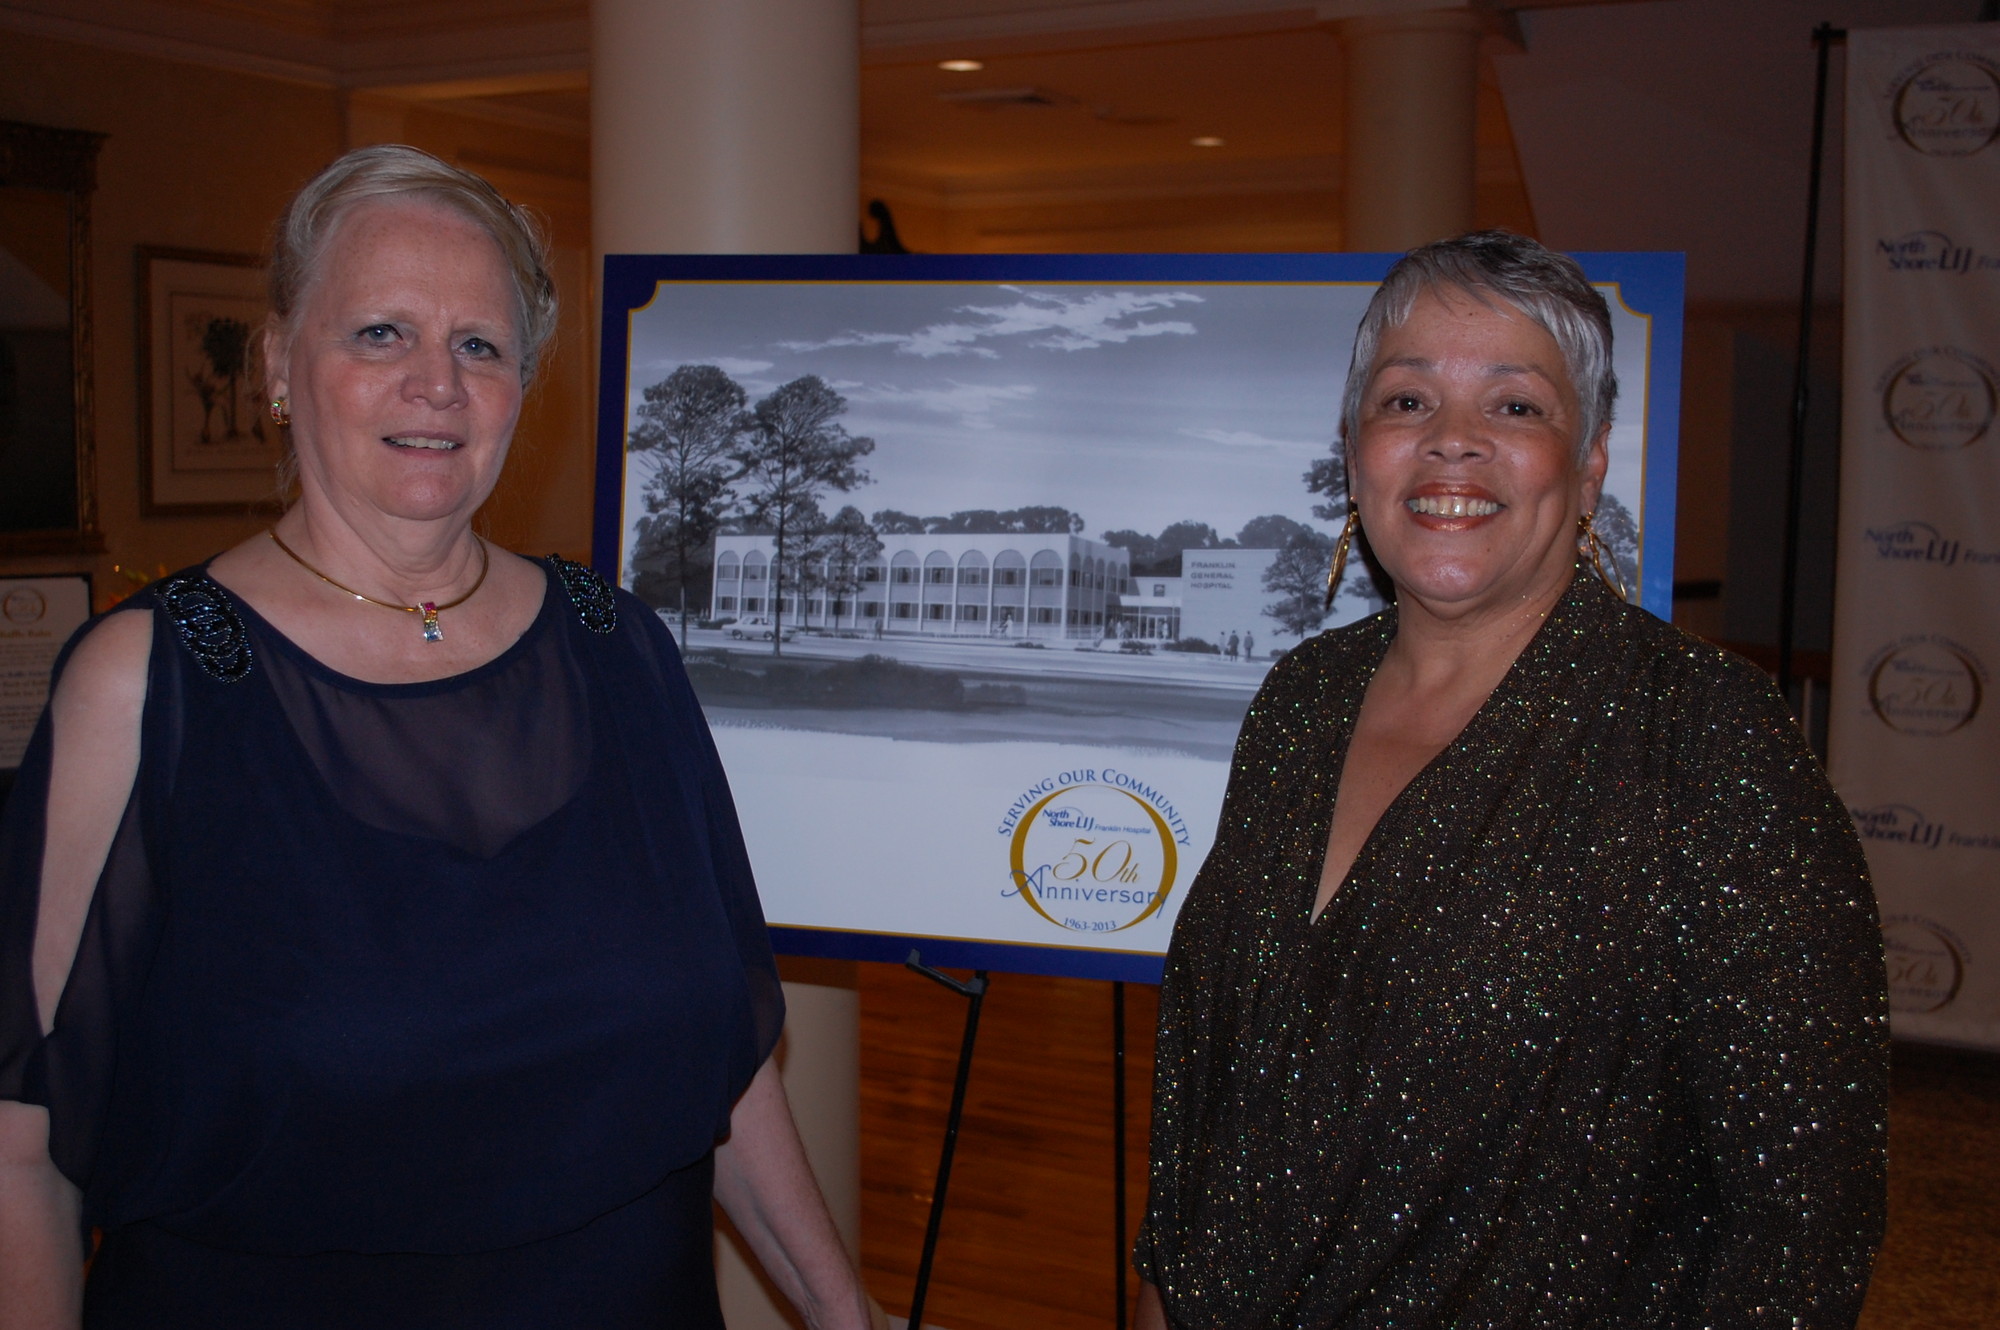 Franklin Executive Director Catherine Hottendorf, left, and Community Relations Manager Helen White greeted guests at the Woodmere Club.